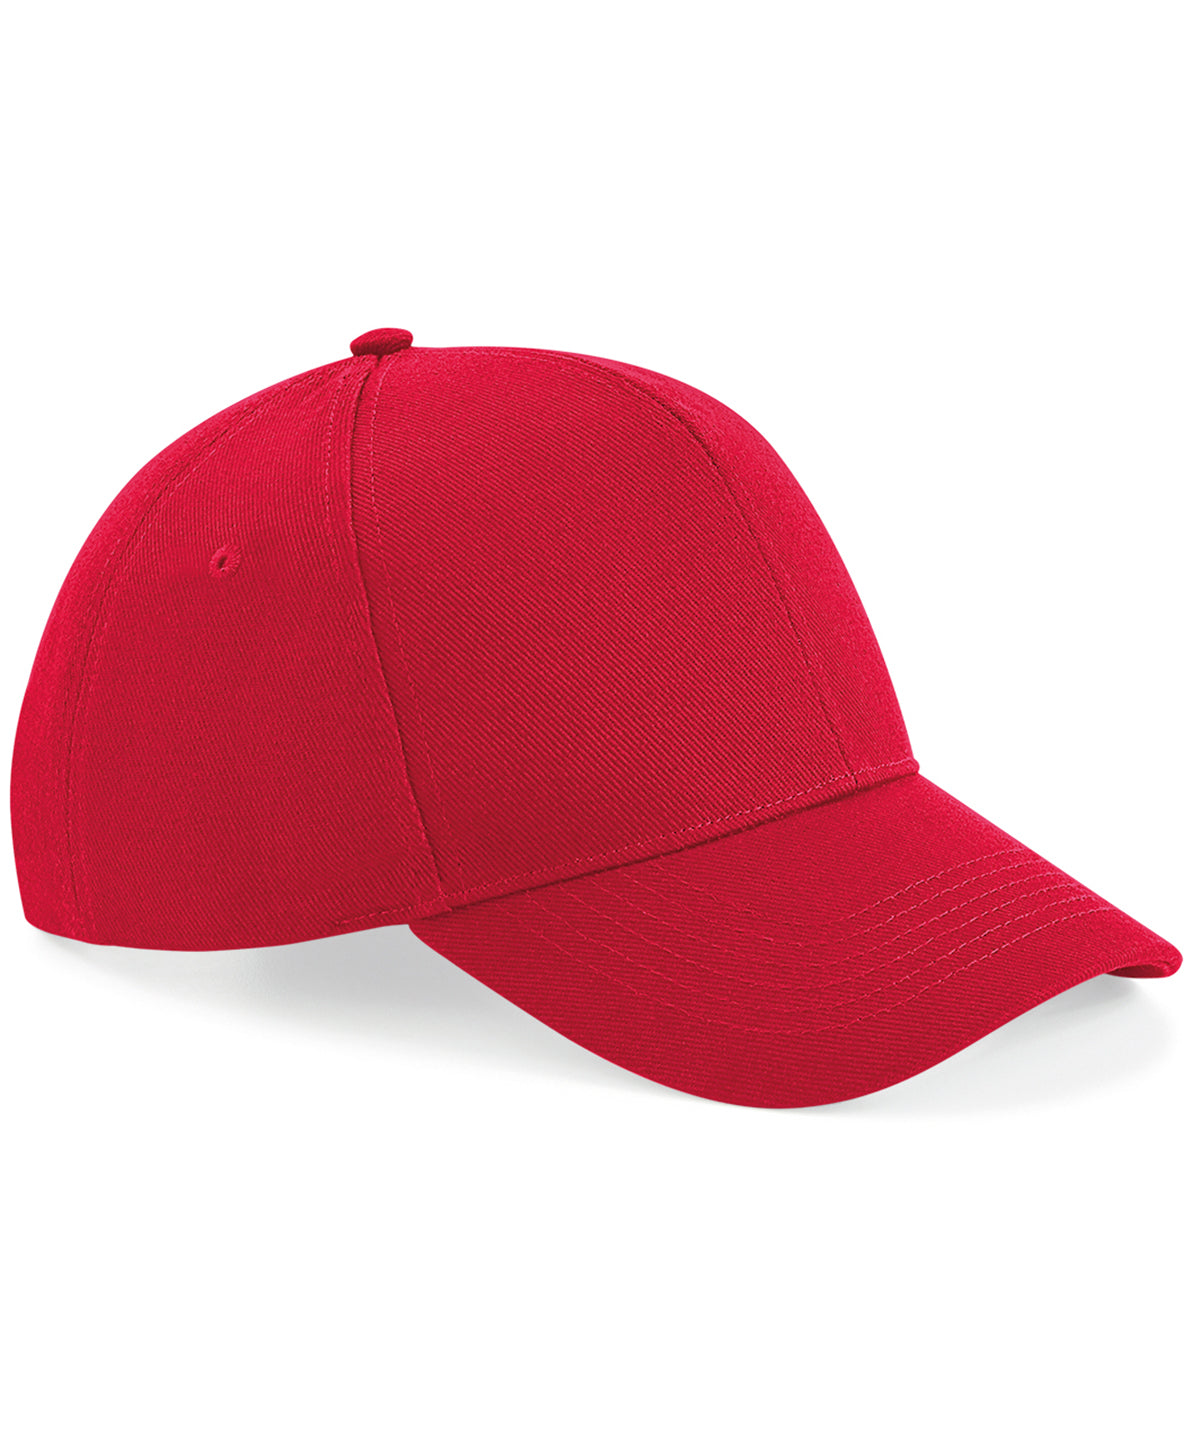 Personalised Caps - Mid Red Beechfield Ultimate 6-panel cap